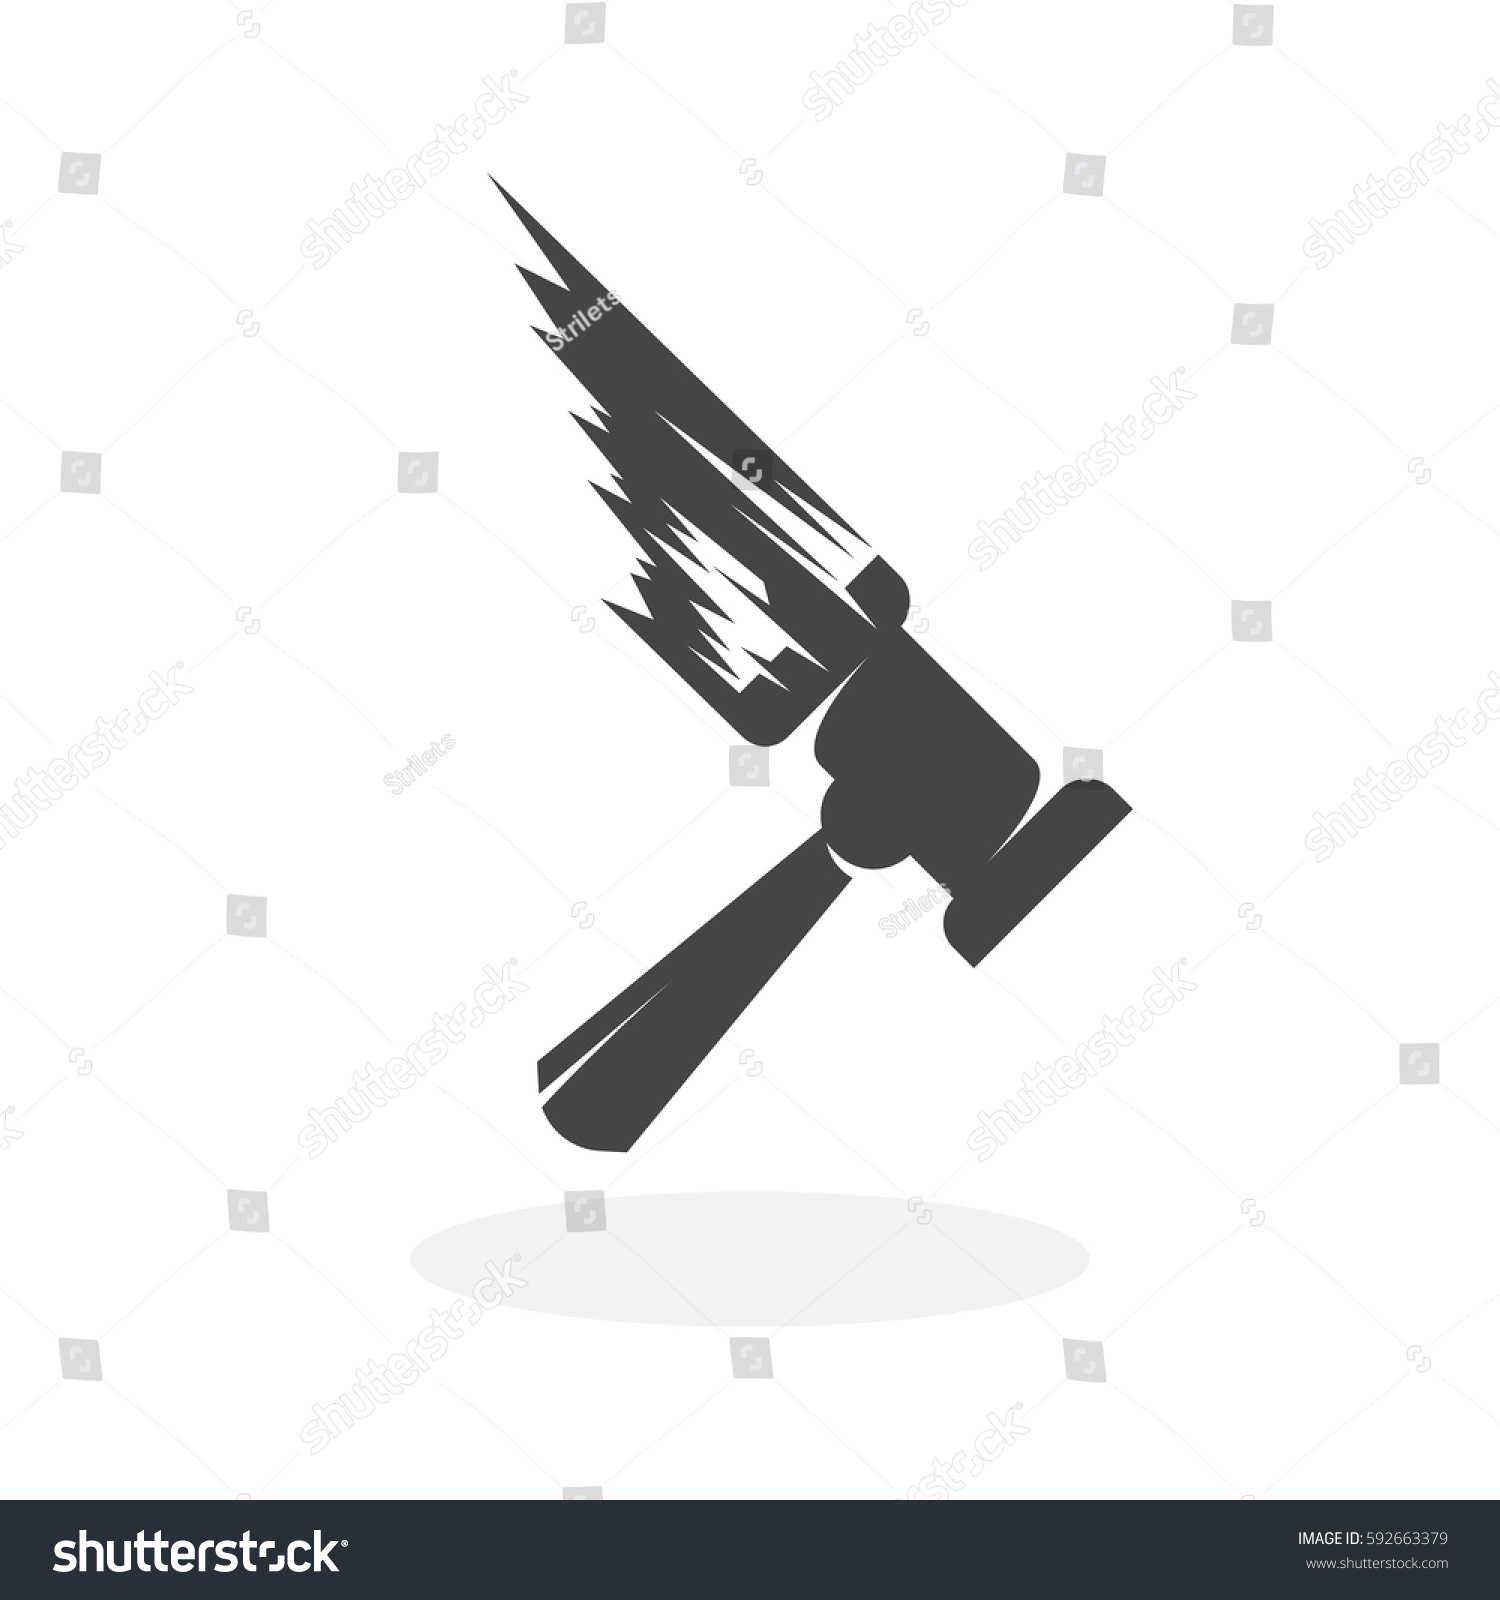 SVG of Thor hammer icon illustration isolated on white background sign symbol. Thor hammer vector logo. Flat design style. Modern vector pictogram for web graphics - stock vector svg